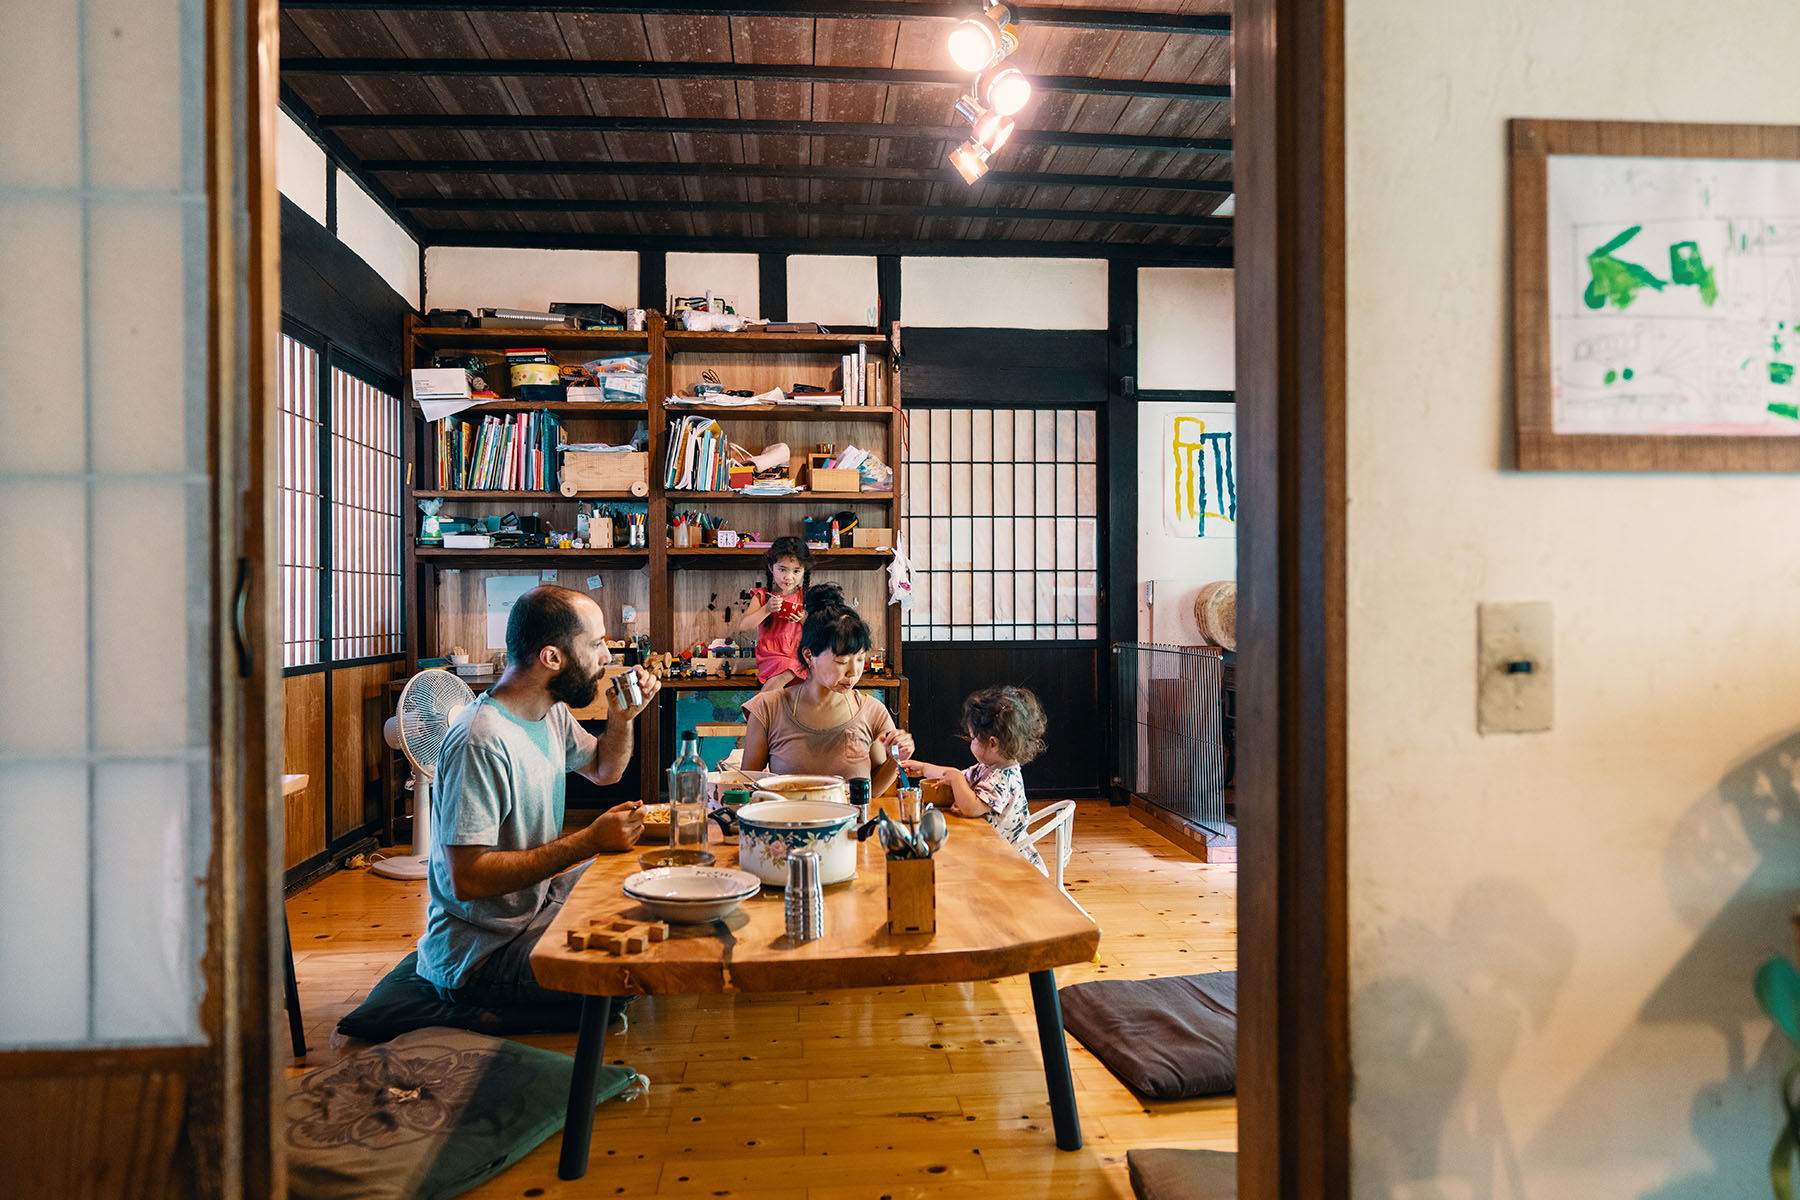 Family eating lunch in a traditional Japanese house in rural Japan. Father, mother, and little baby are sitting on the floor, at the table. Young daughter is standing closeby near the book shelves.